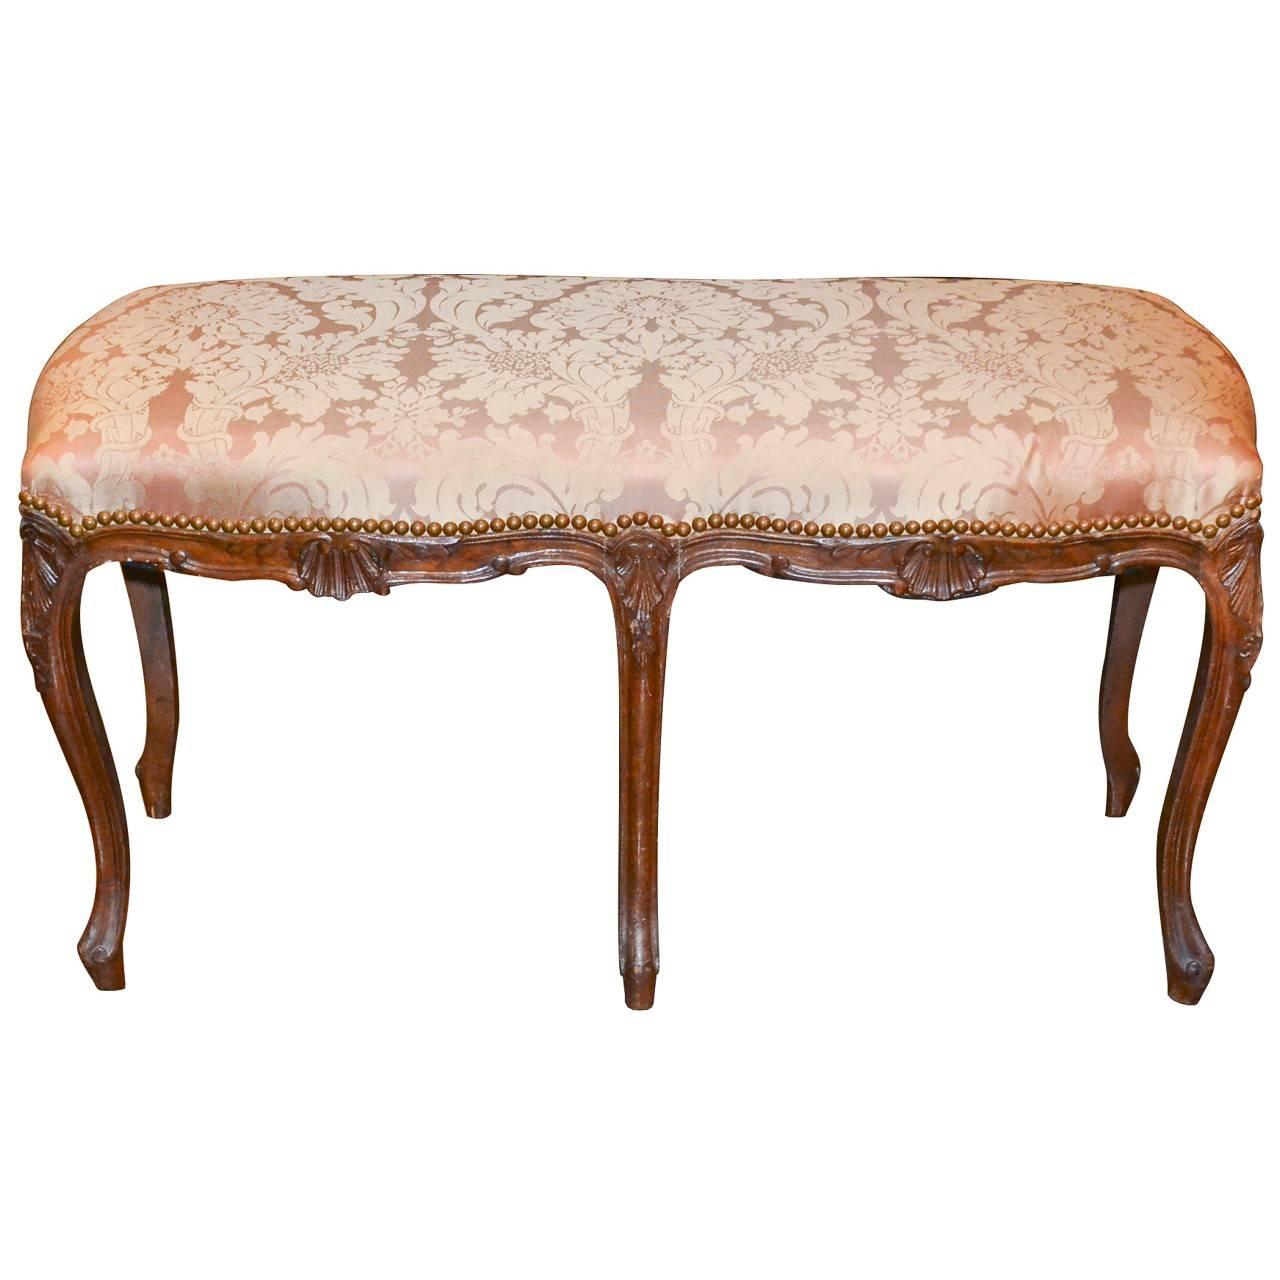 Antique French walnut upholstered bench, circa 1890. Made in France.